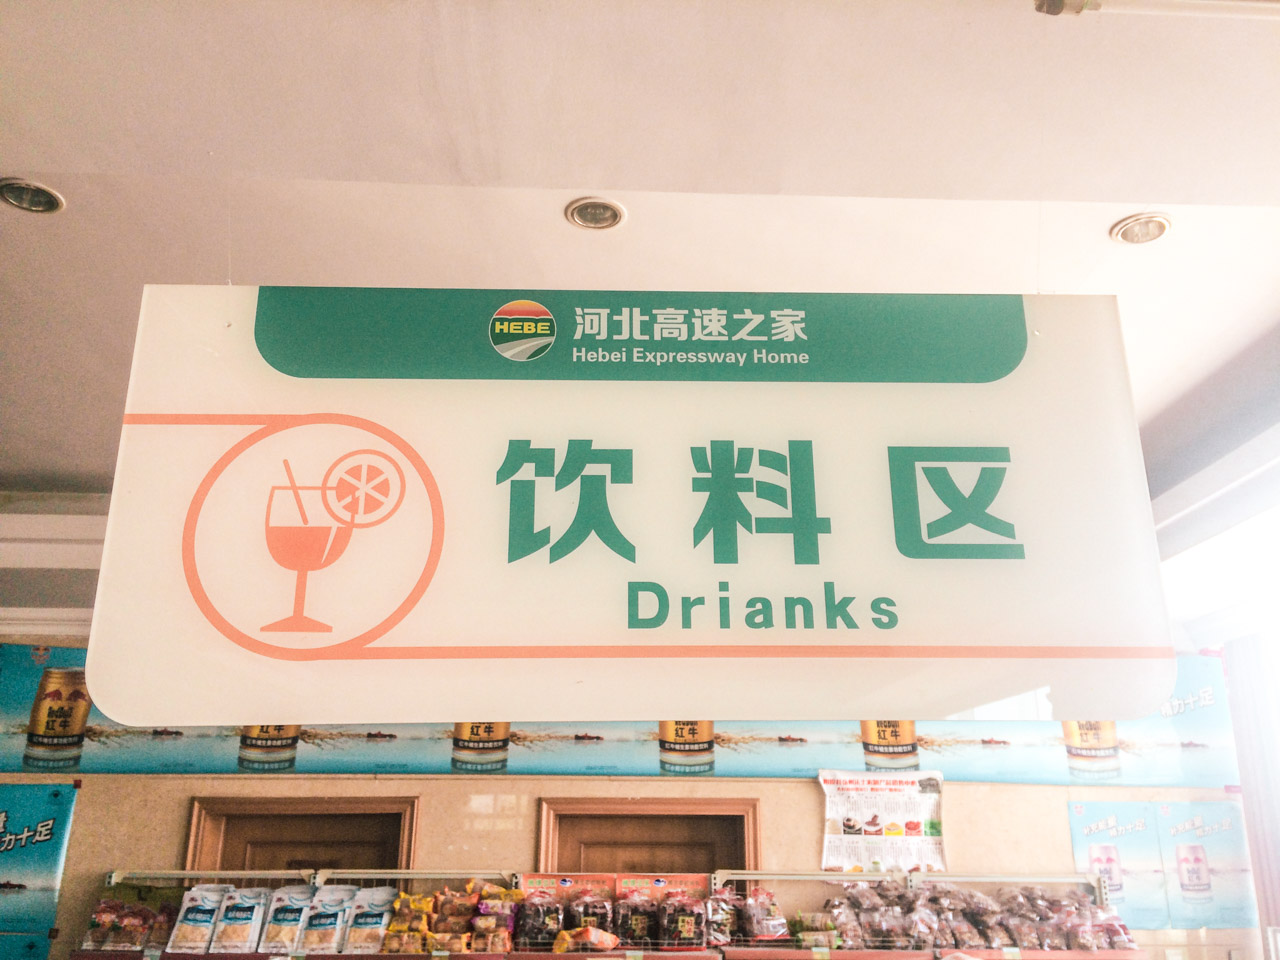 A grocery shop aisle sign in China that says "Drianks"